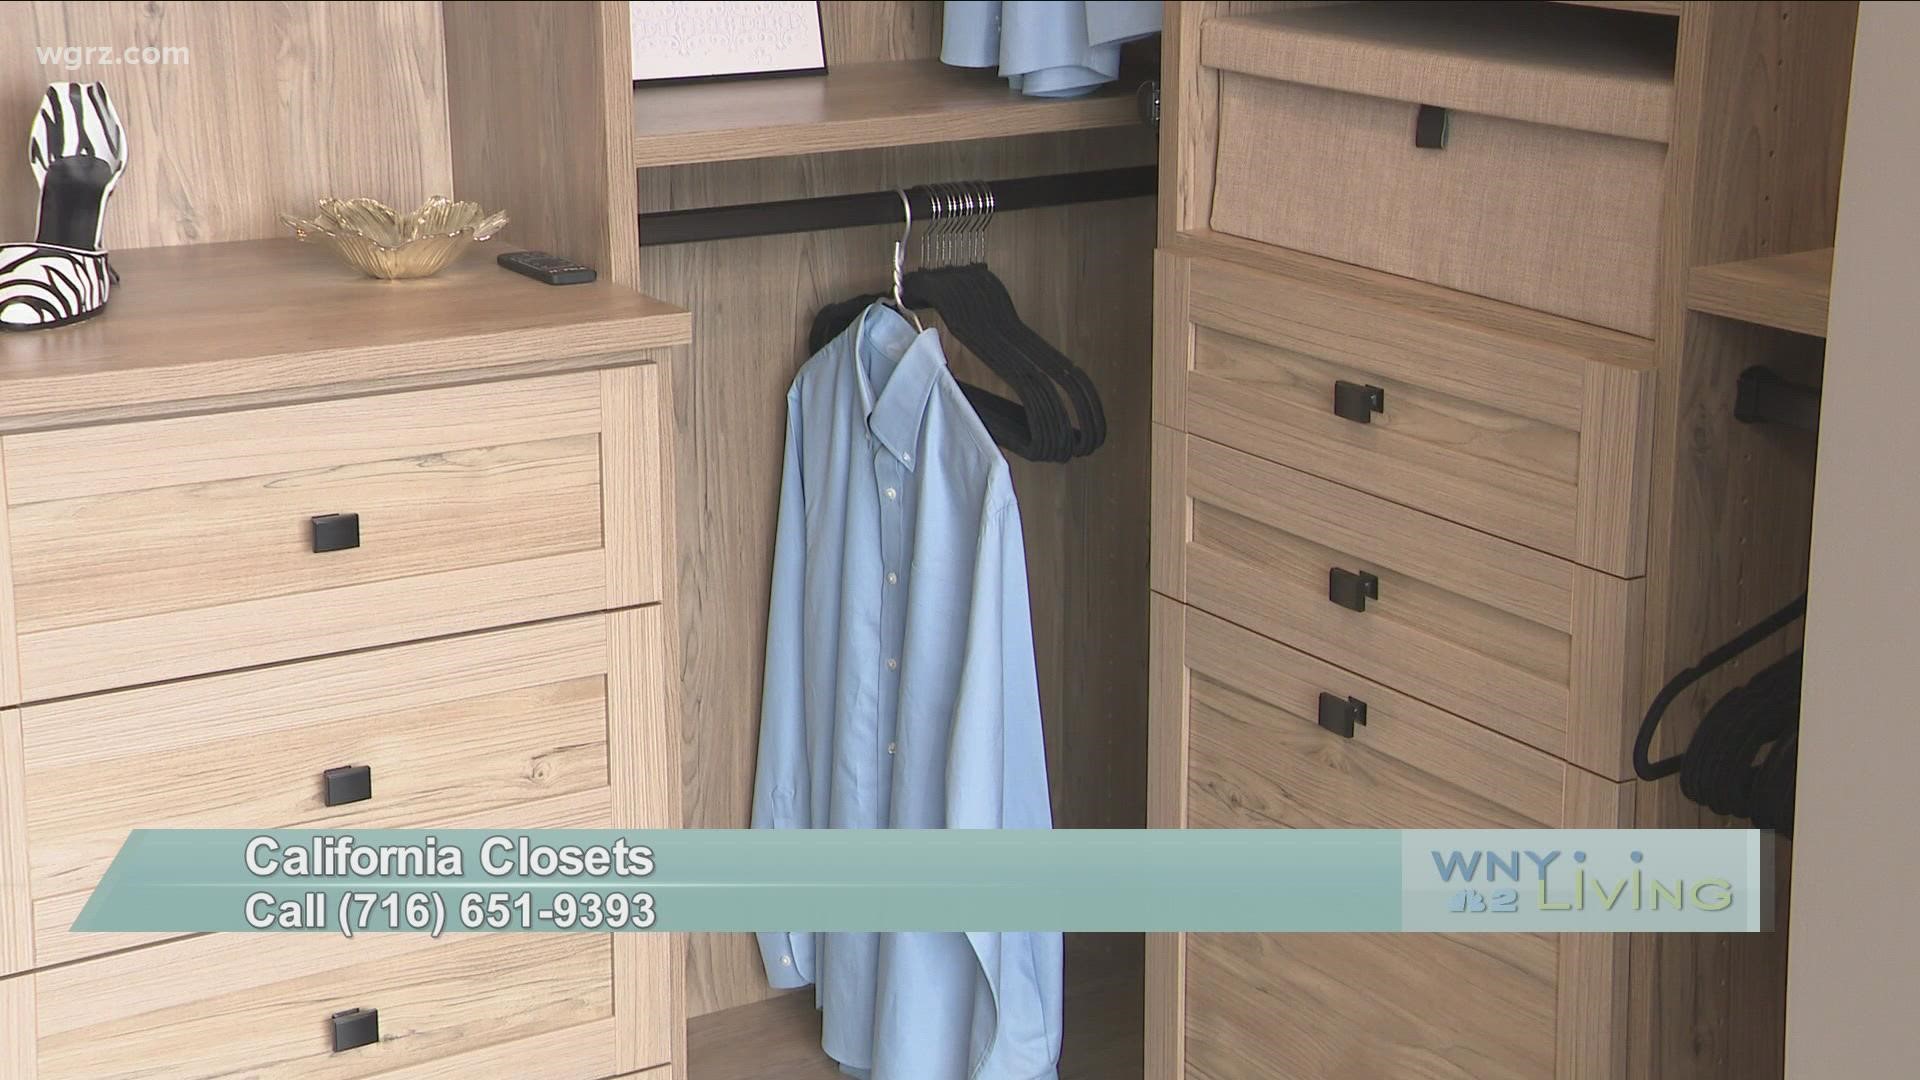 WNY Living - September 18 - California Closets (THIS VIDEO IS SPONSORED BY CALIFORNIA CLOSETS)